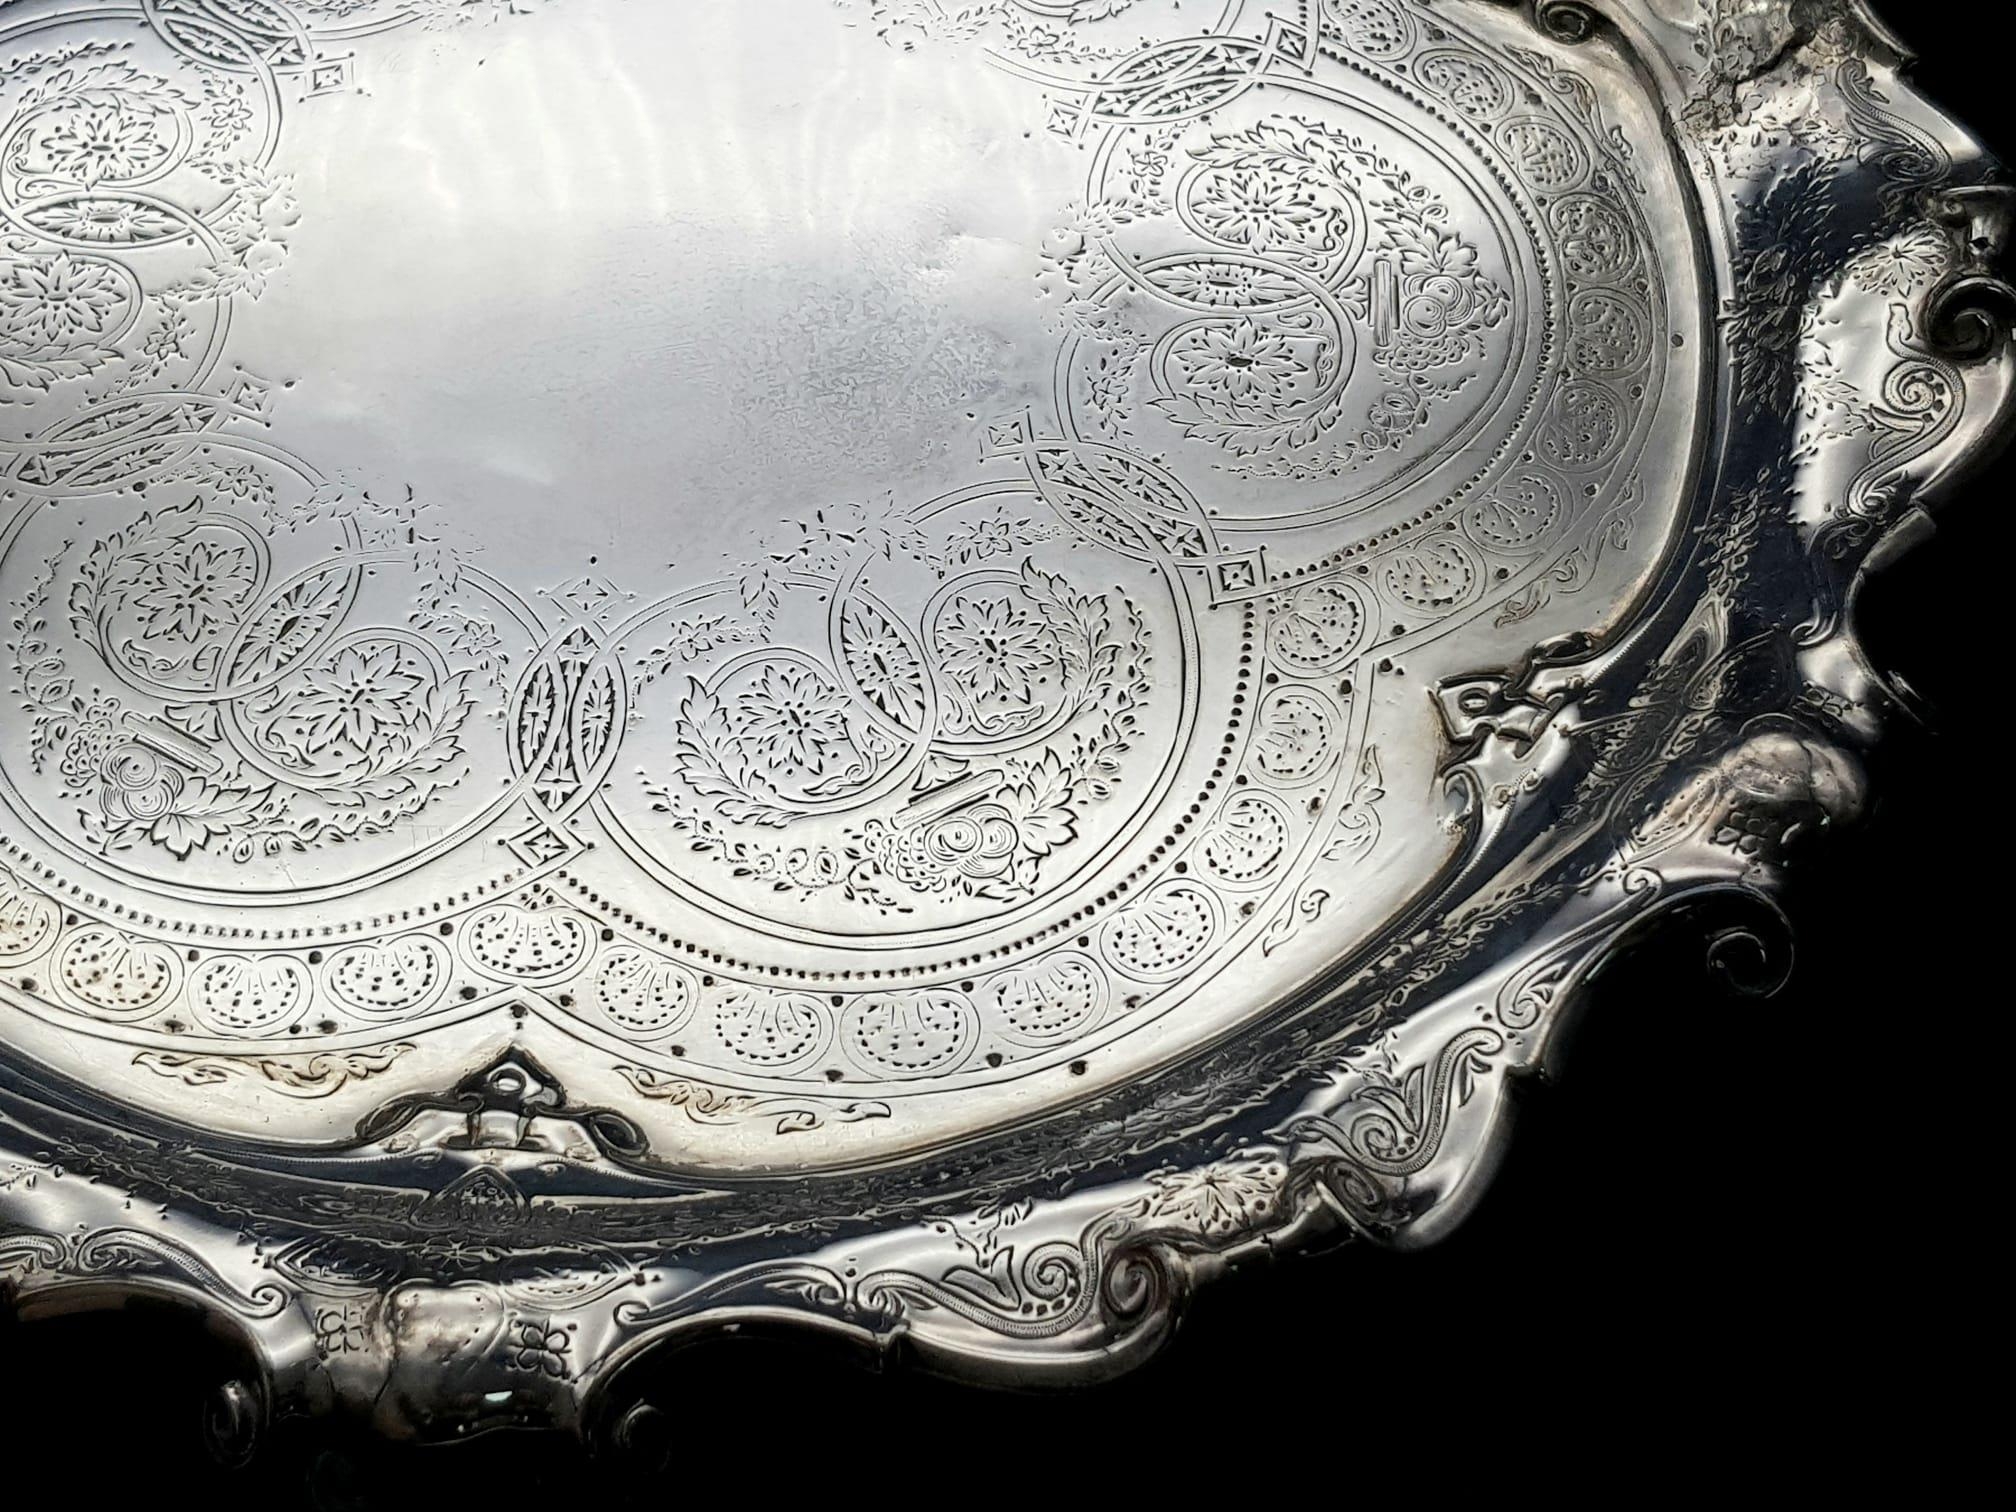 A 761gms solid silver Salva with scrolled edges and hand chased intricate decoration and - Image 3 of 6